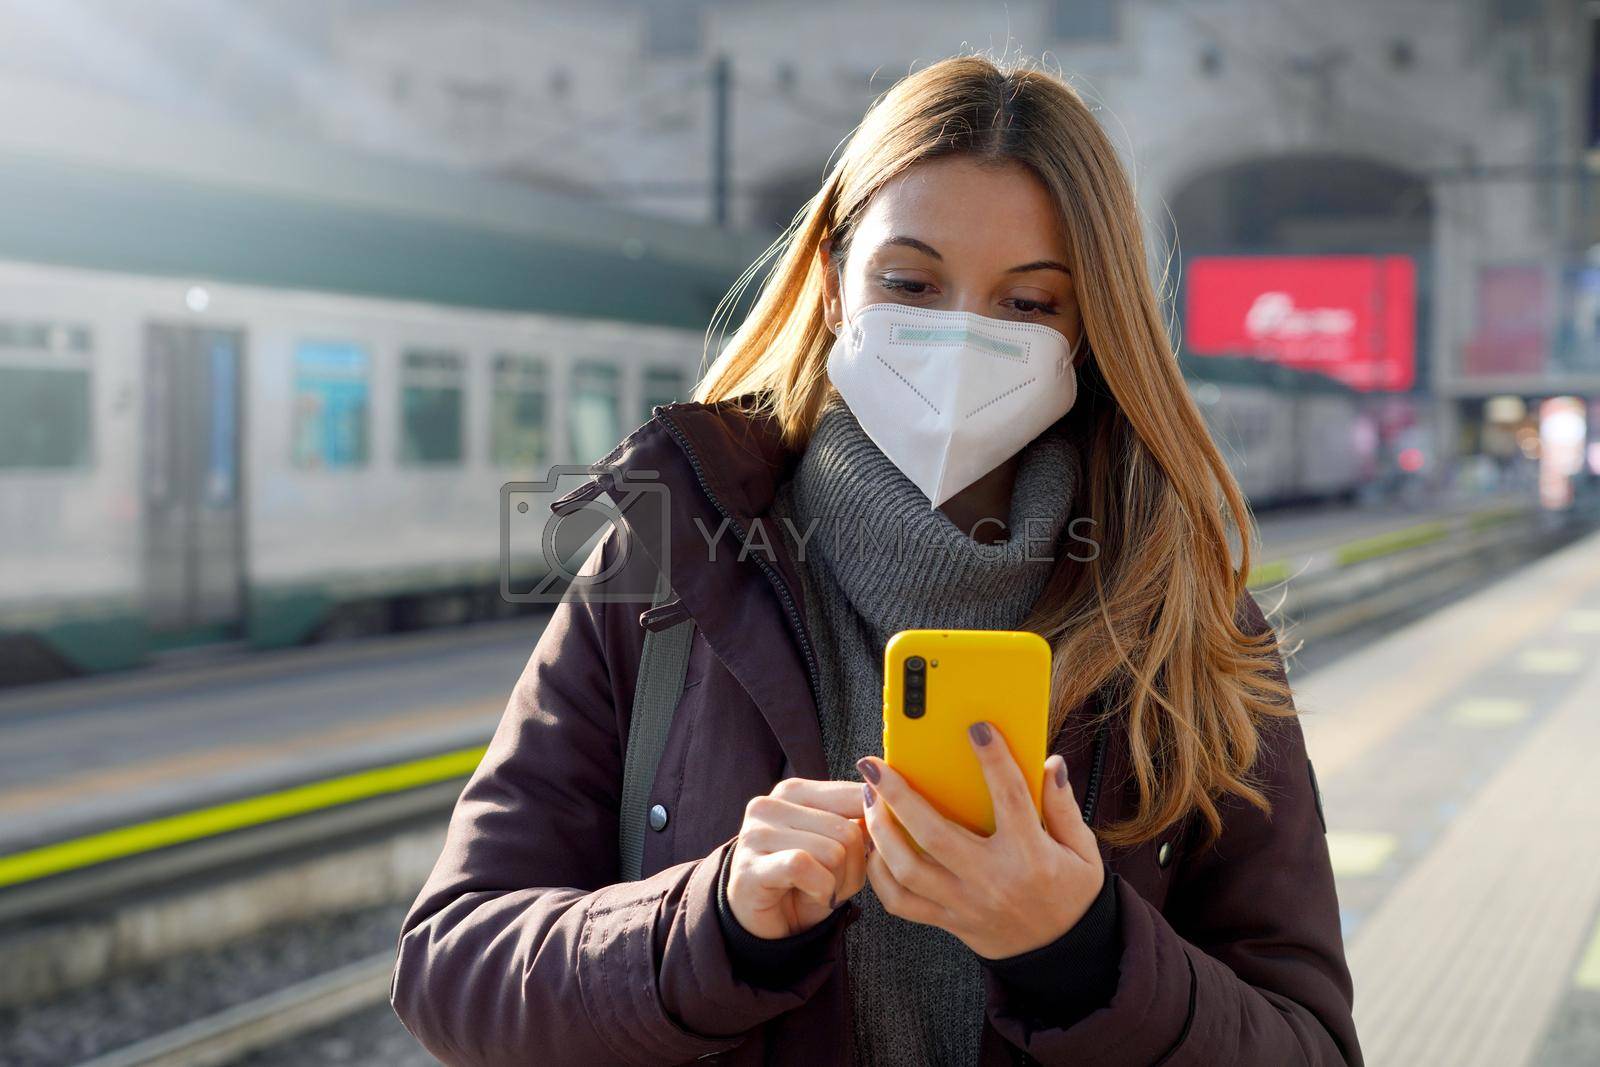 Portrait of a girl in a protective mask standing on the platform of train station with a mobile phone buying ticket online